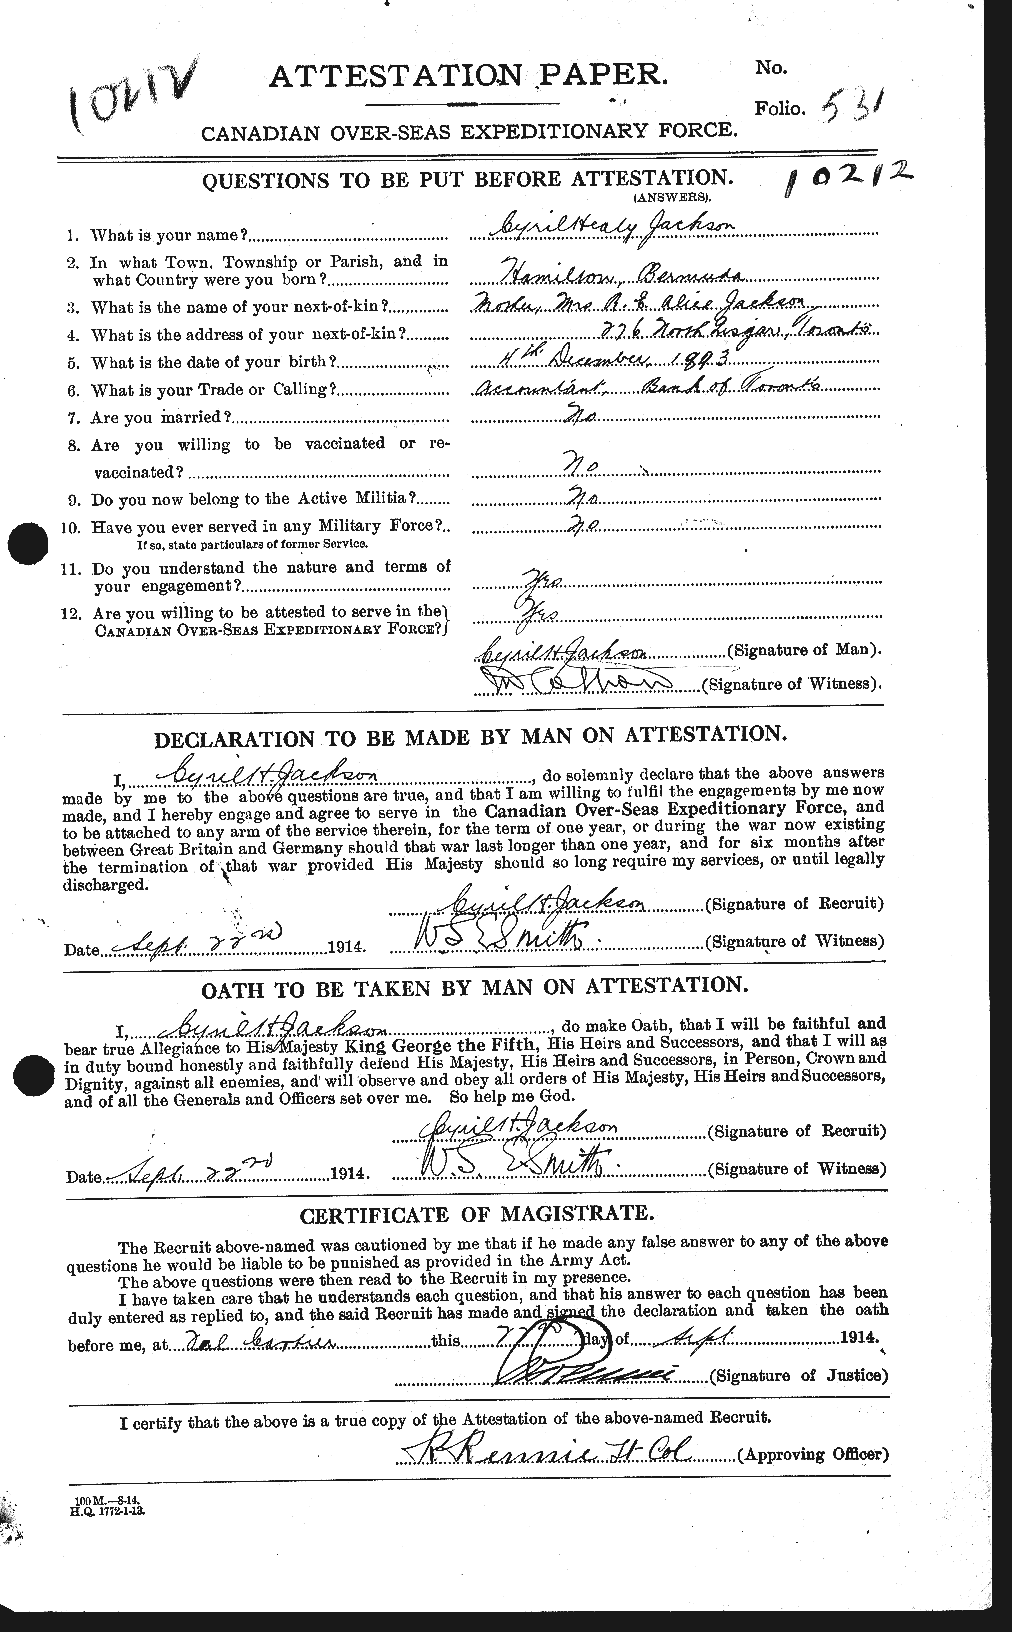 Personnel Records of the First World War - CEF 411857a